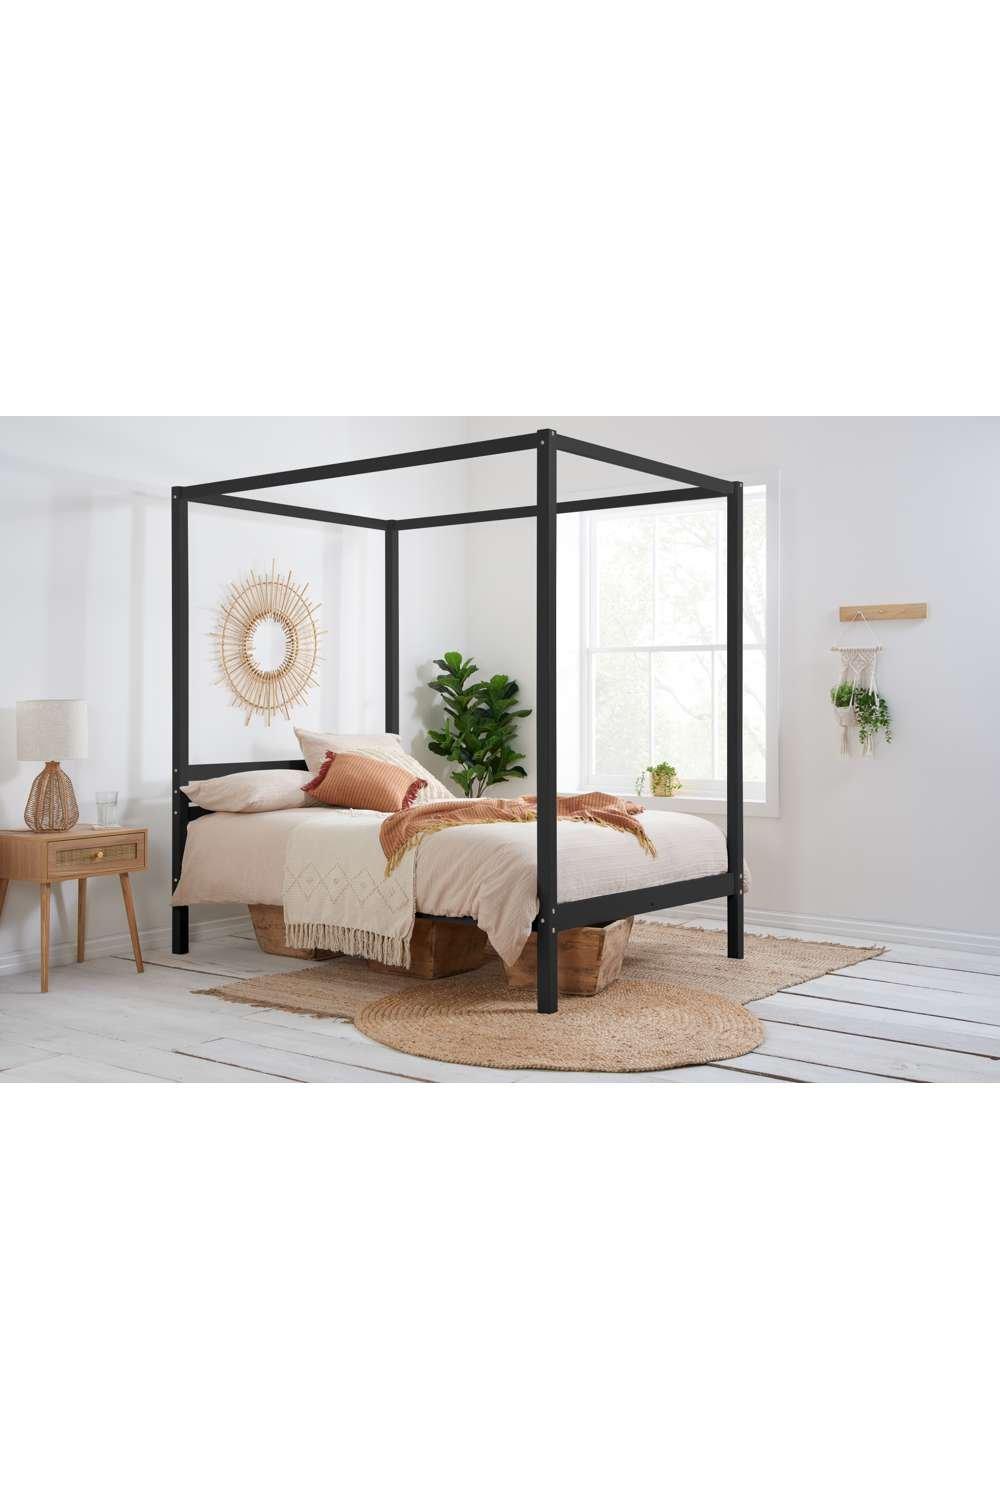 Four Poster Bed Frame Solid Wood 4 Poster Canopy Mercia